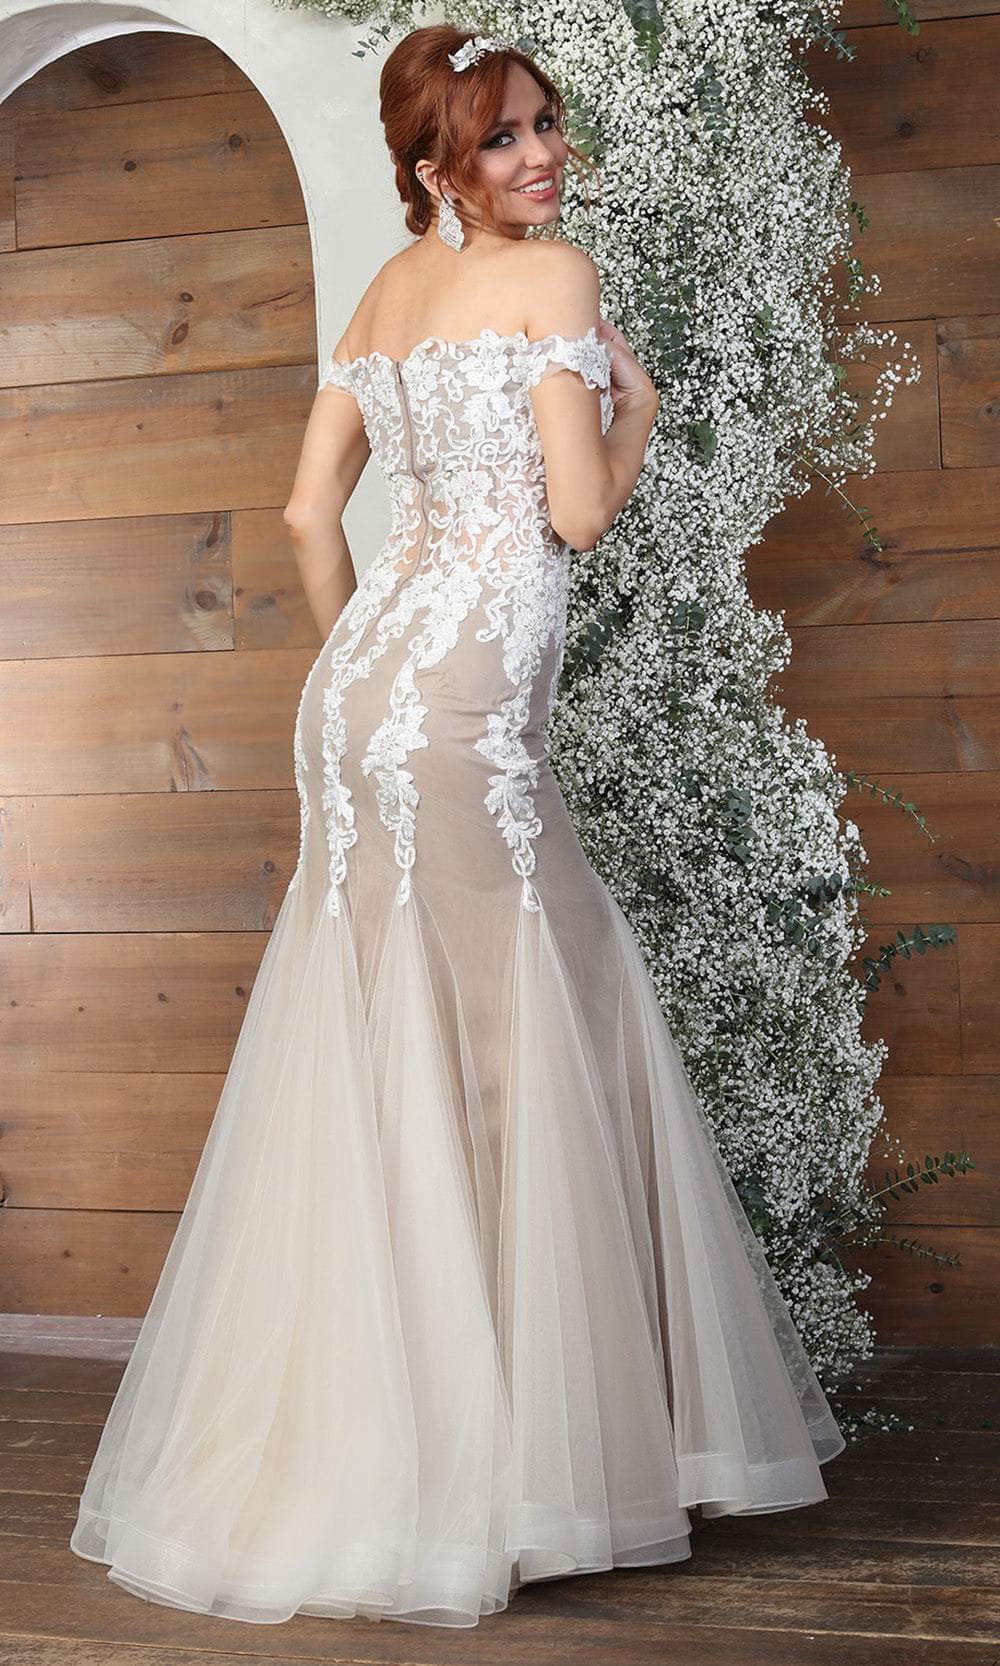 May Queen RQ8086 - Sweetheart Godets Mermaid Evening Gown Wedding Dresses